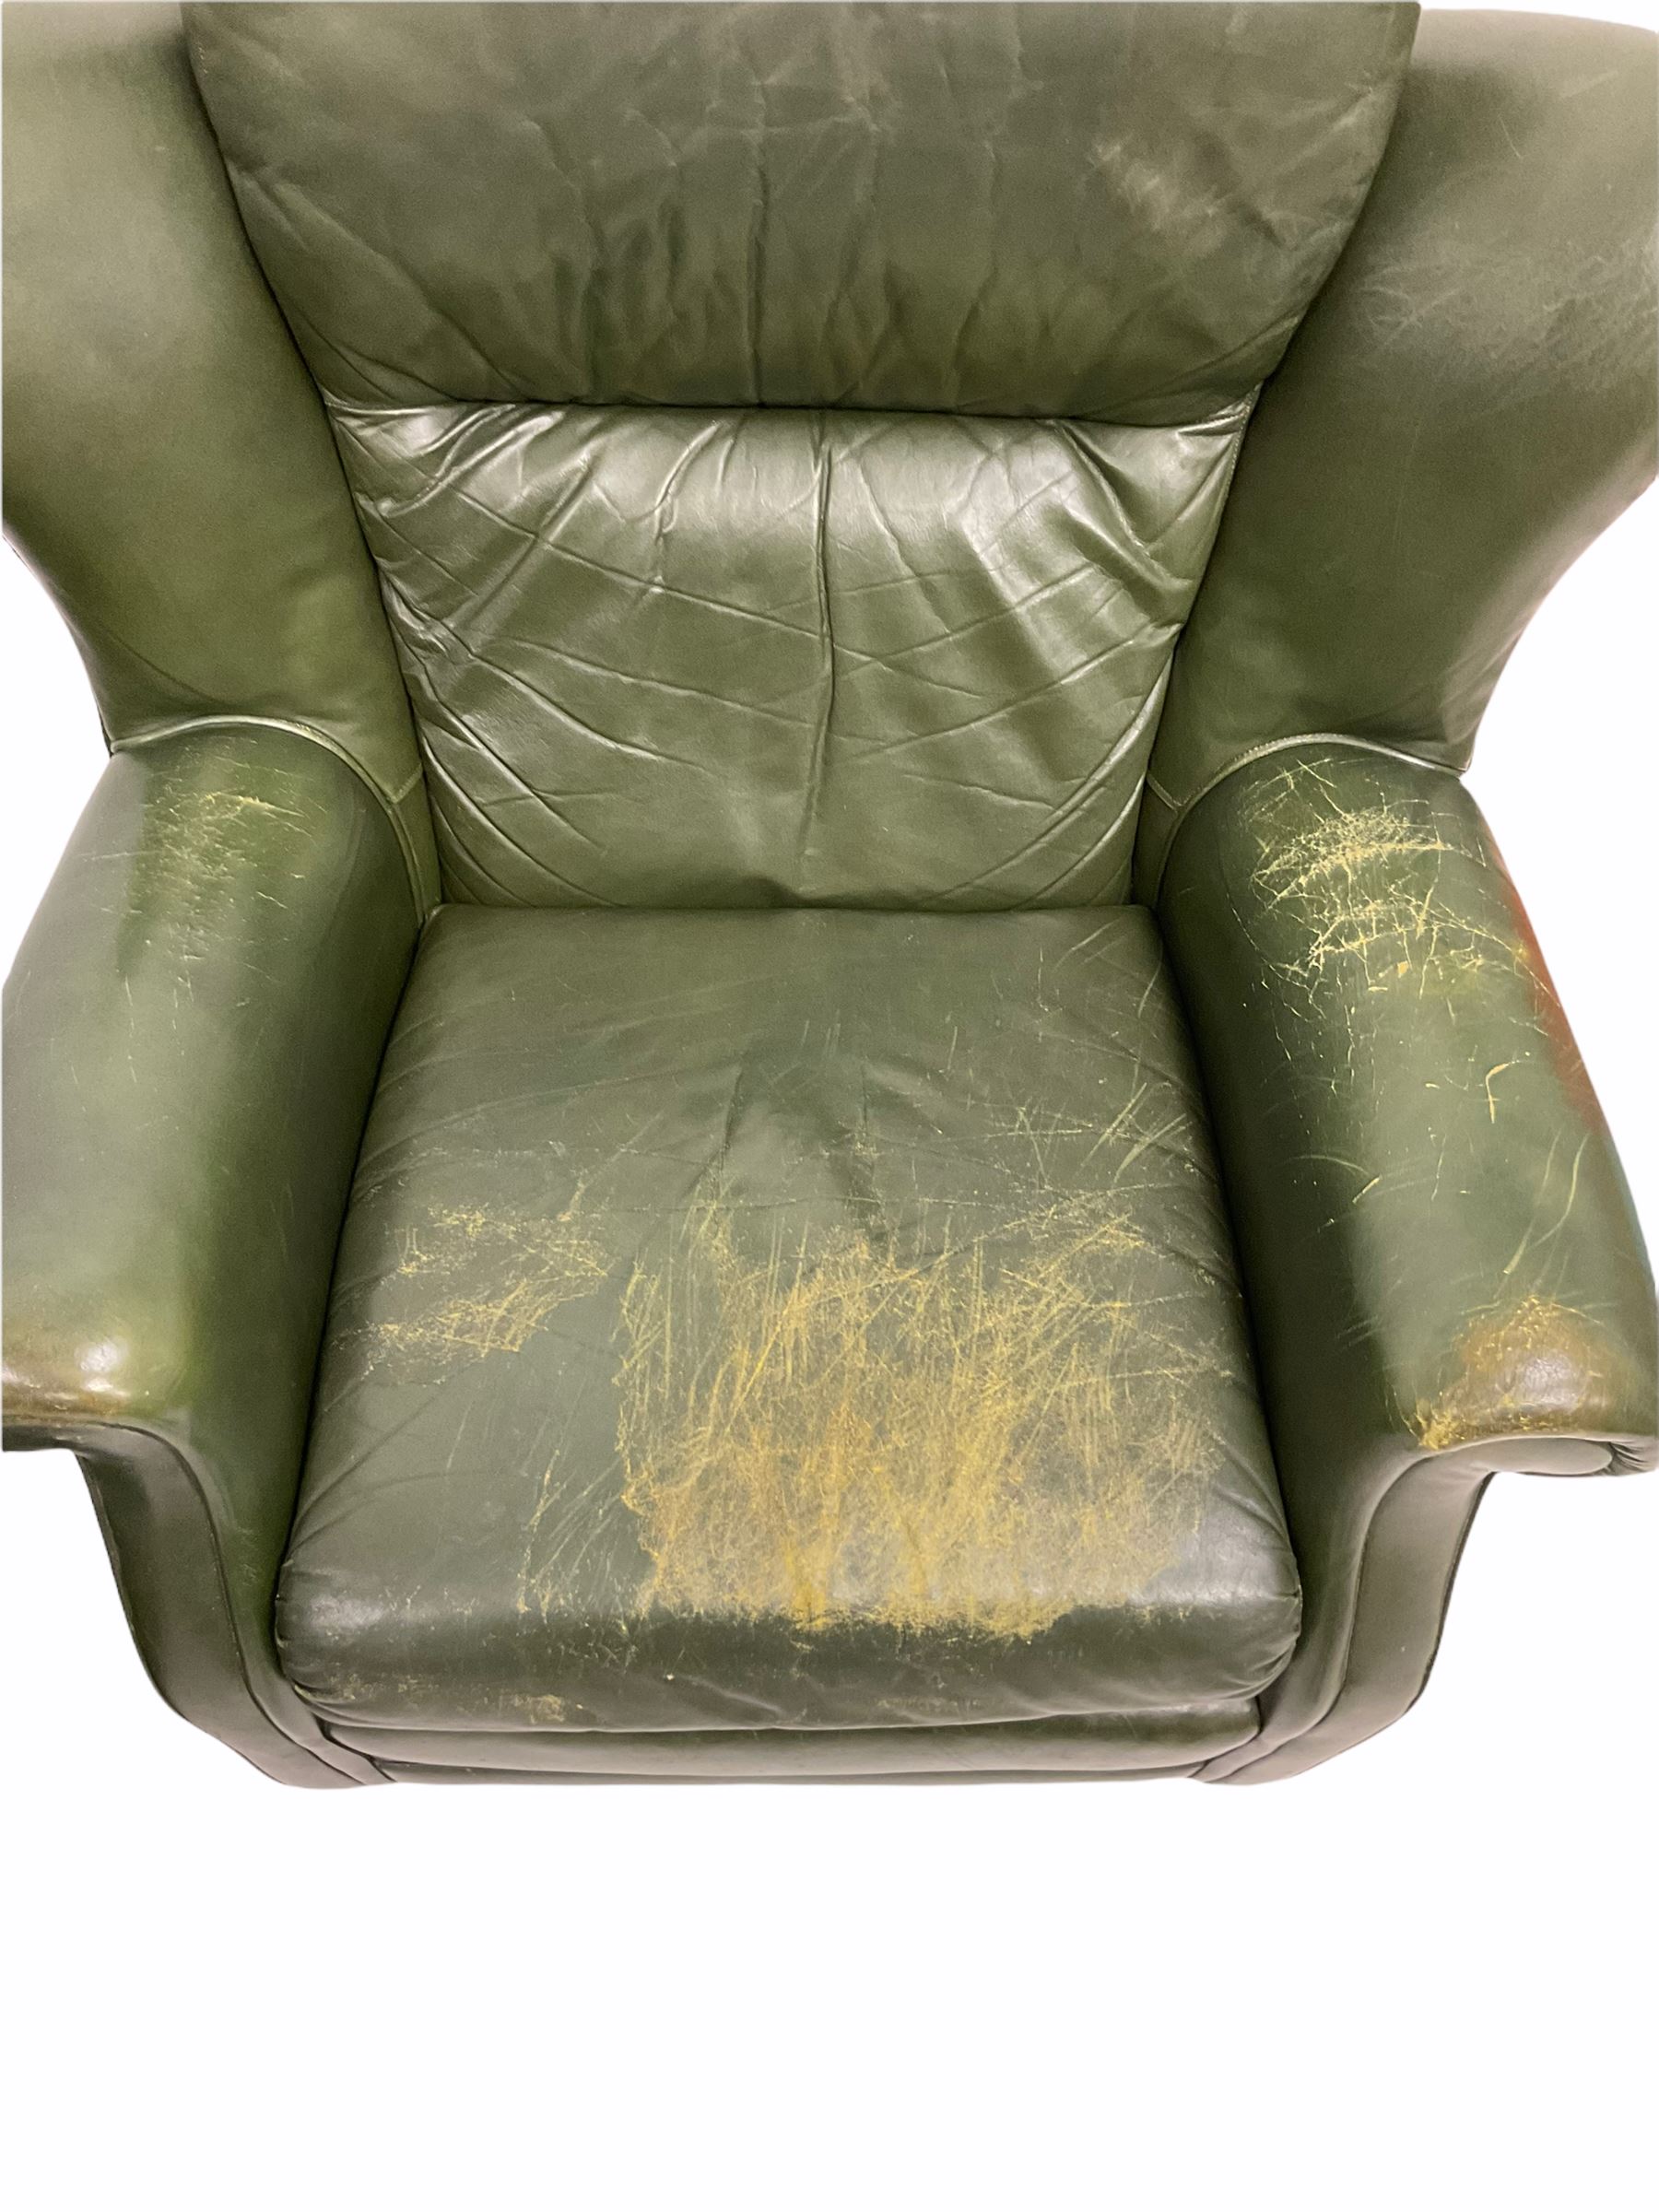 Pair of vintage green leather wing back armchairs - Image 2 of 3